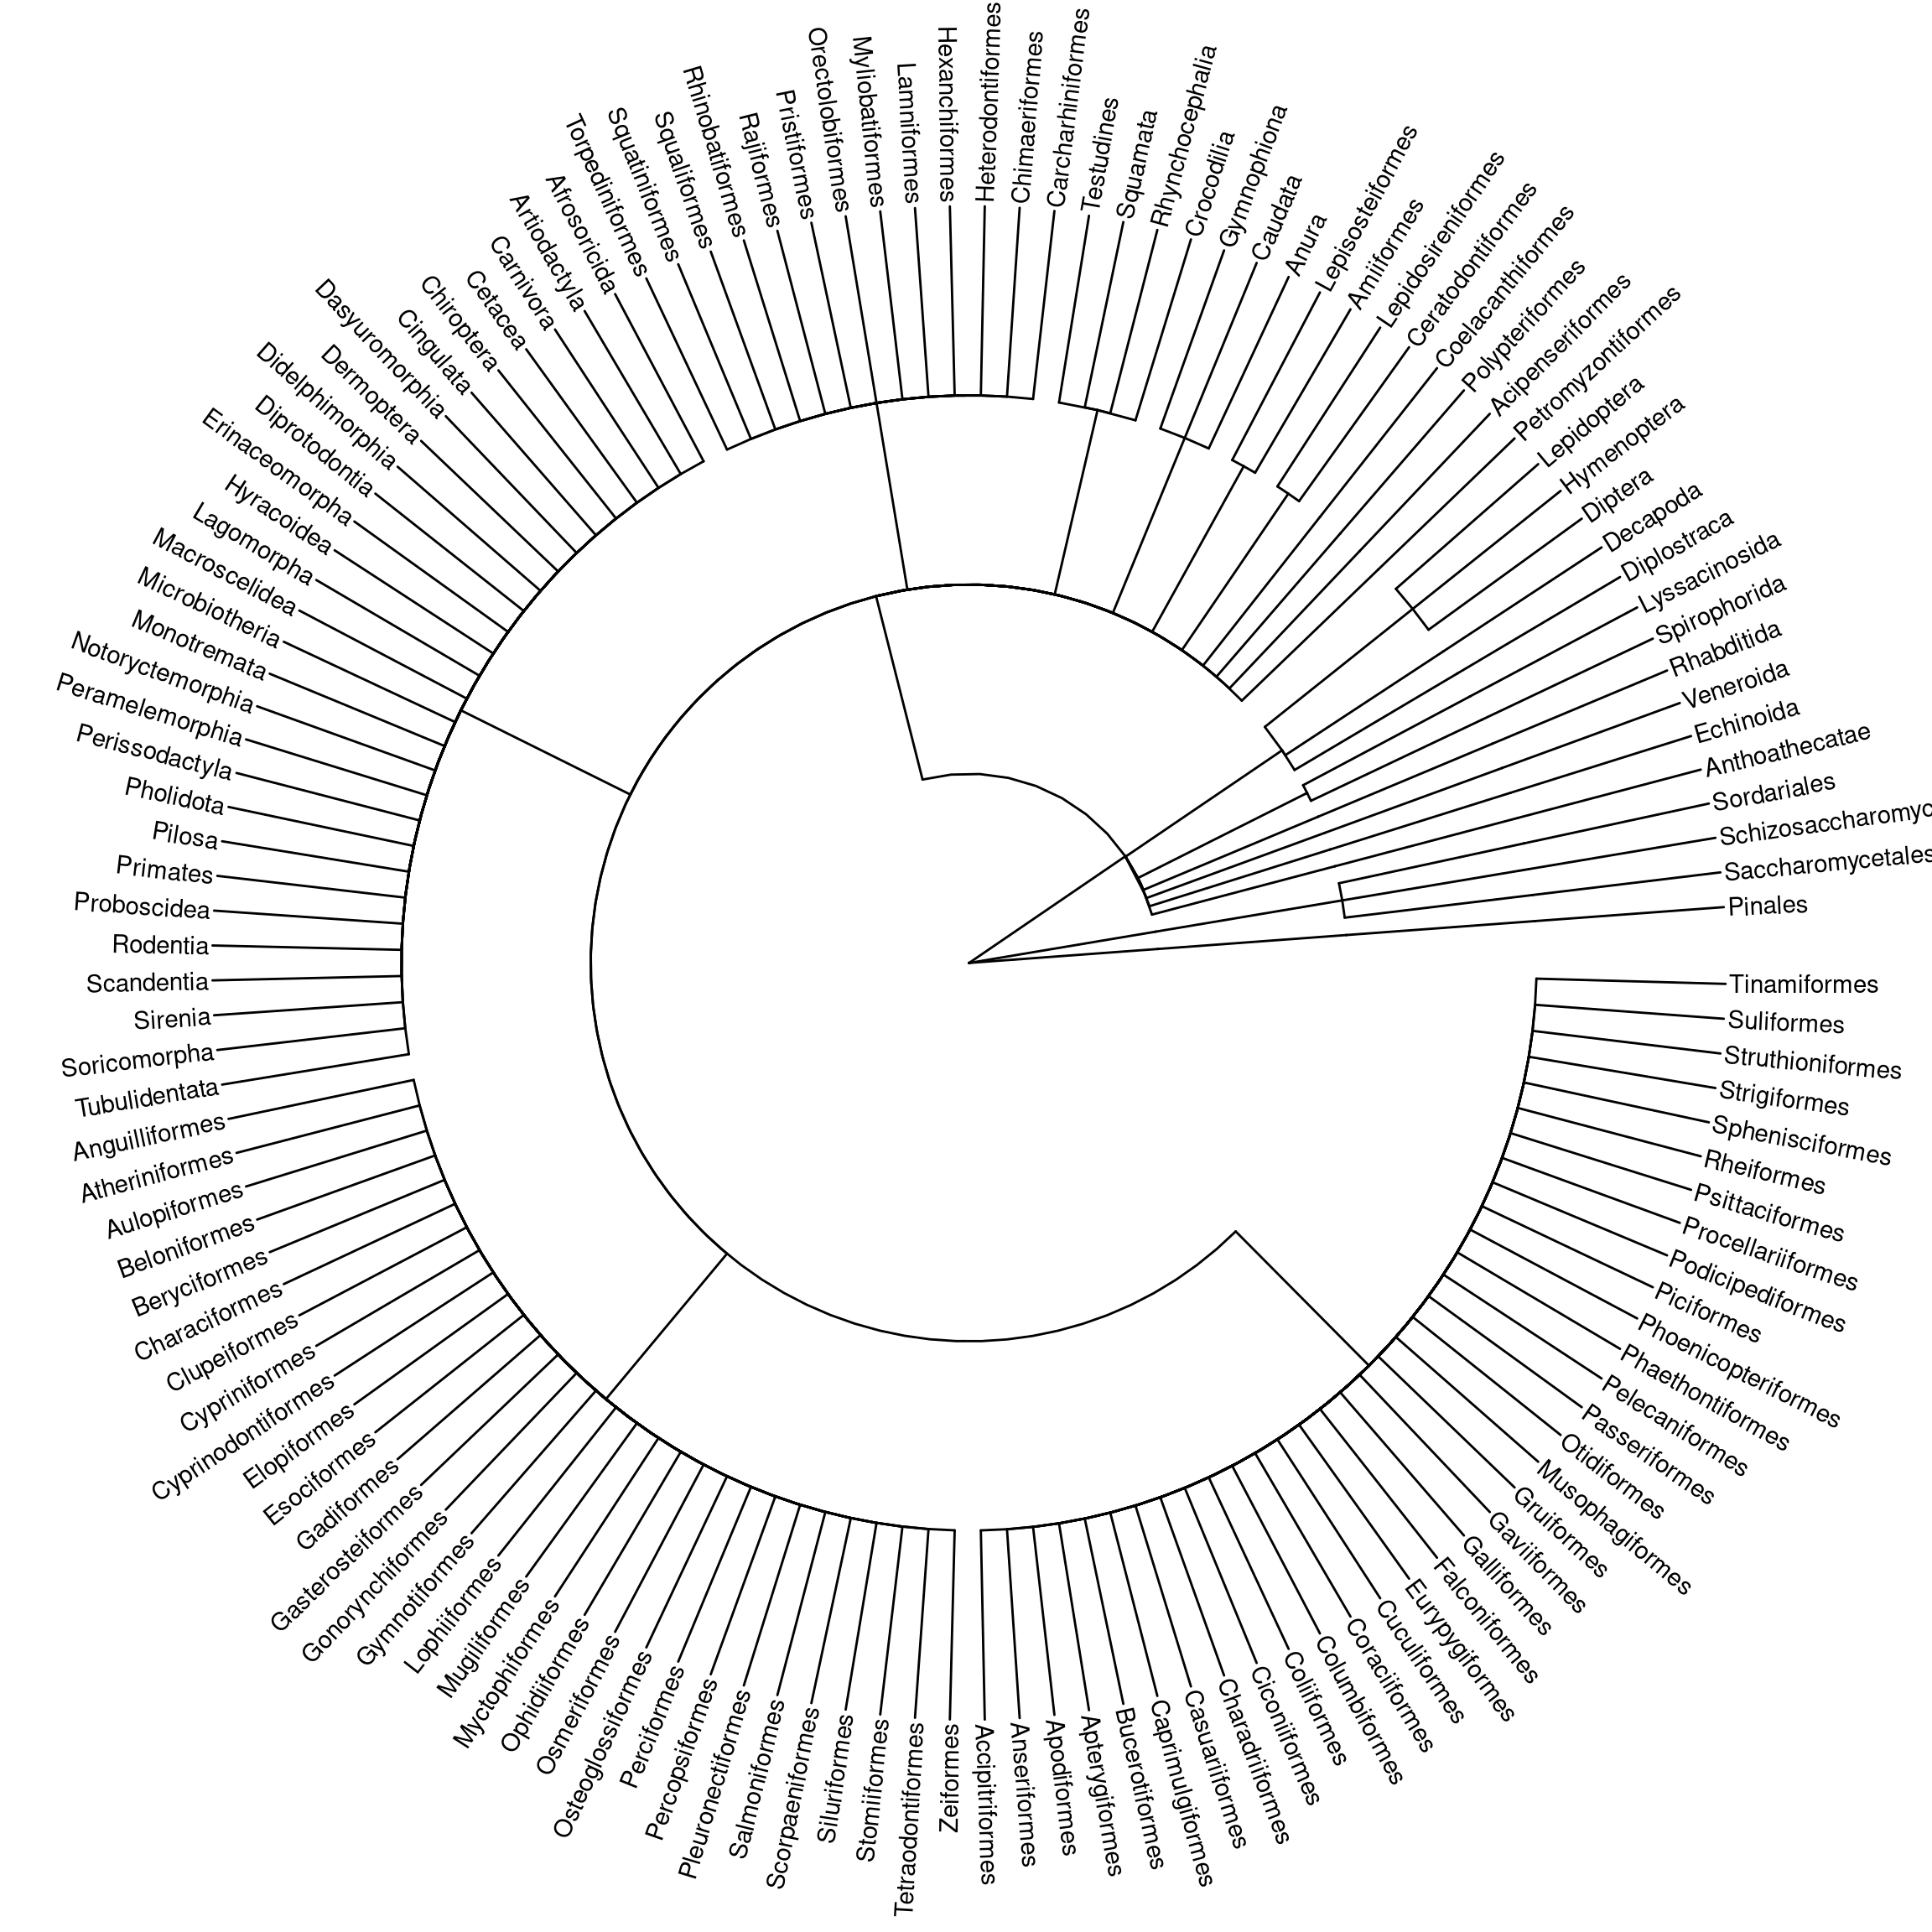 A phylogenetic tree.